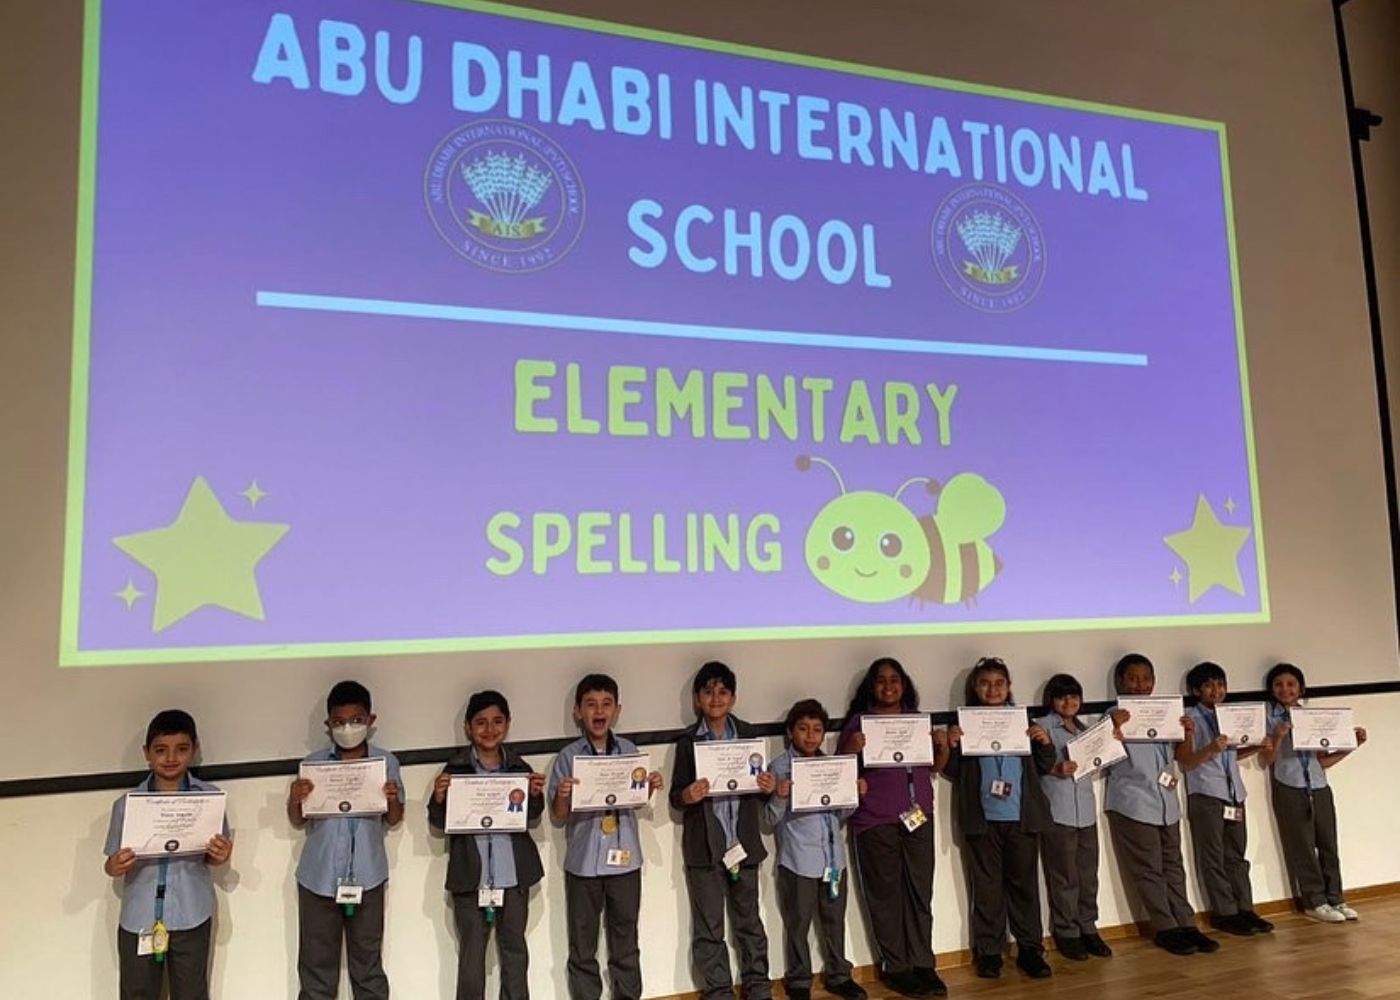 Elementary students of Abu Dhabi International School at the Spelling Bee event